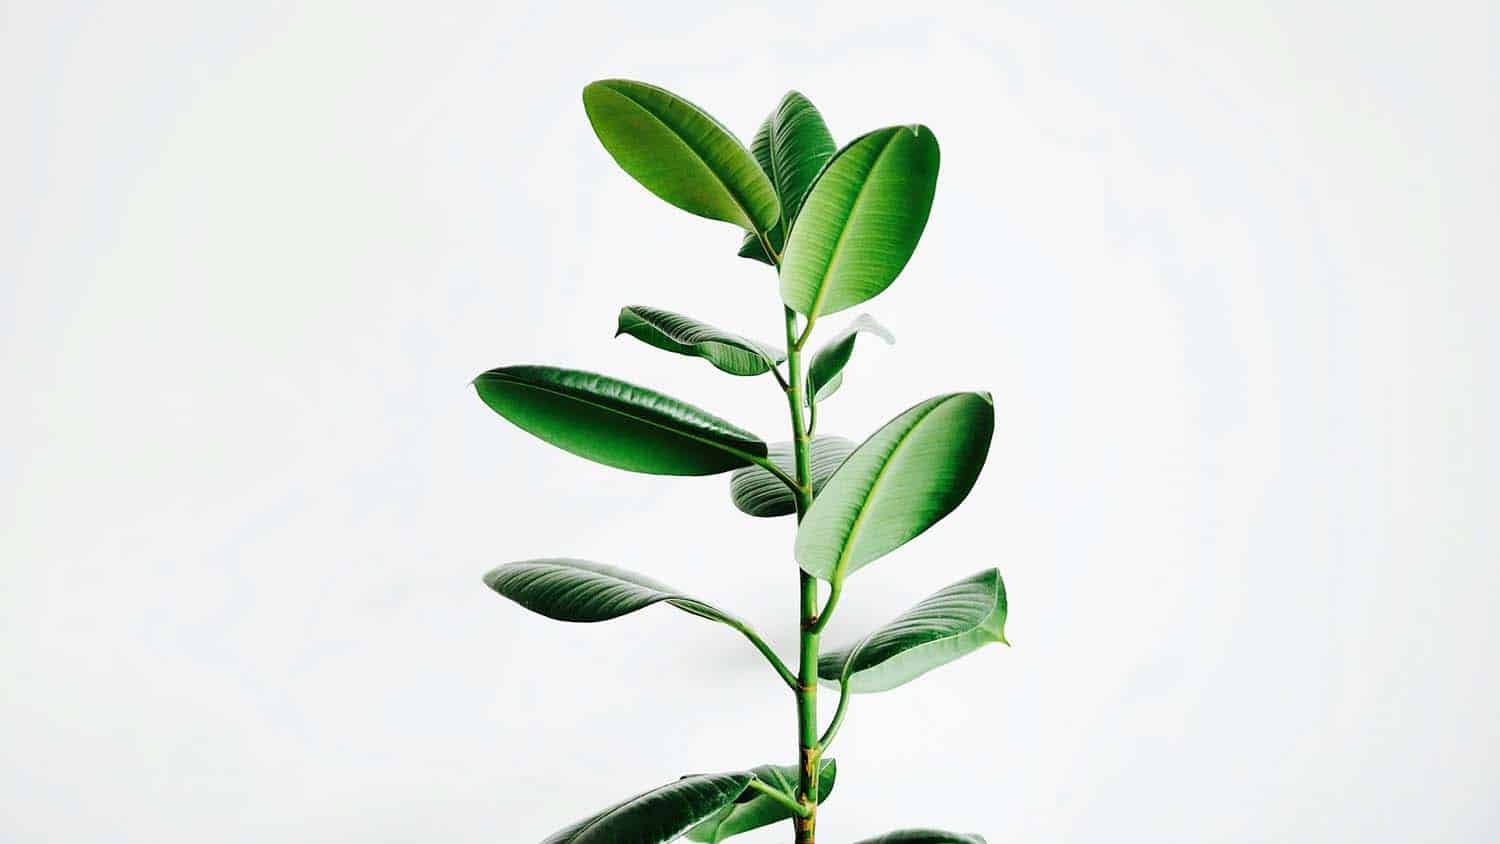 photo shows a green, leafy plant against a white backdrop